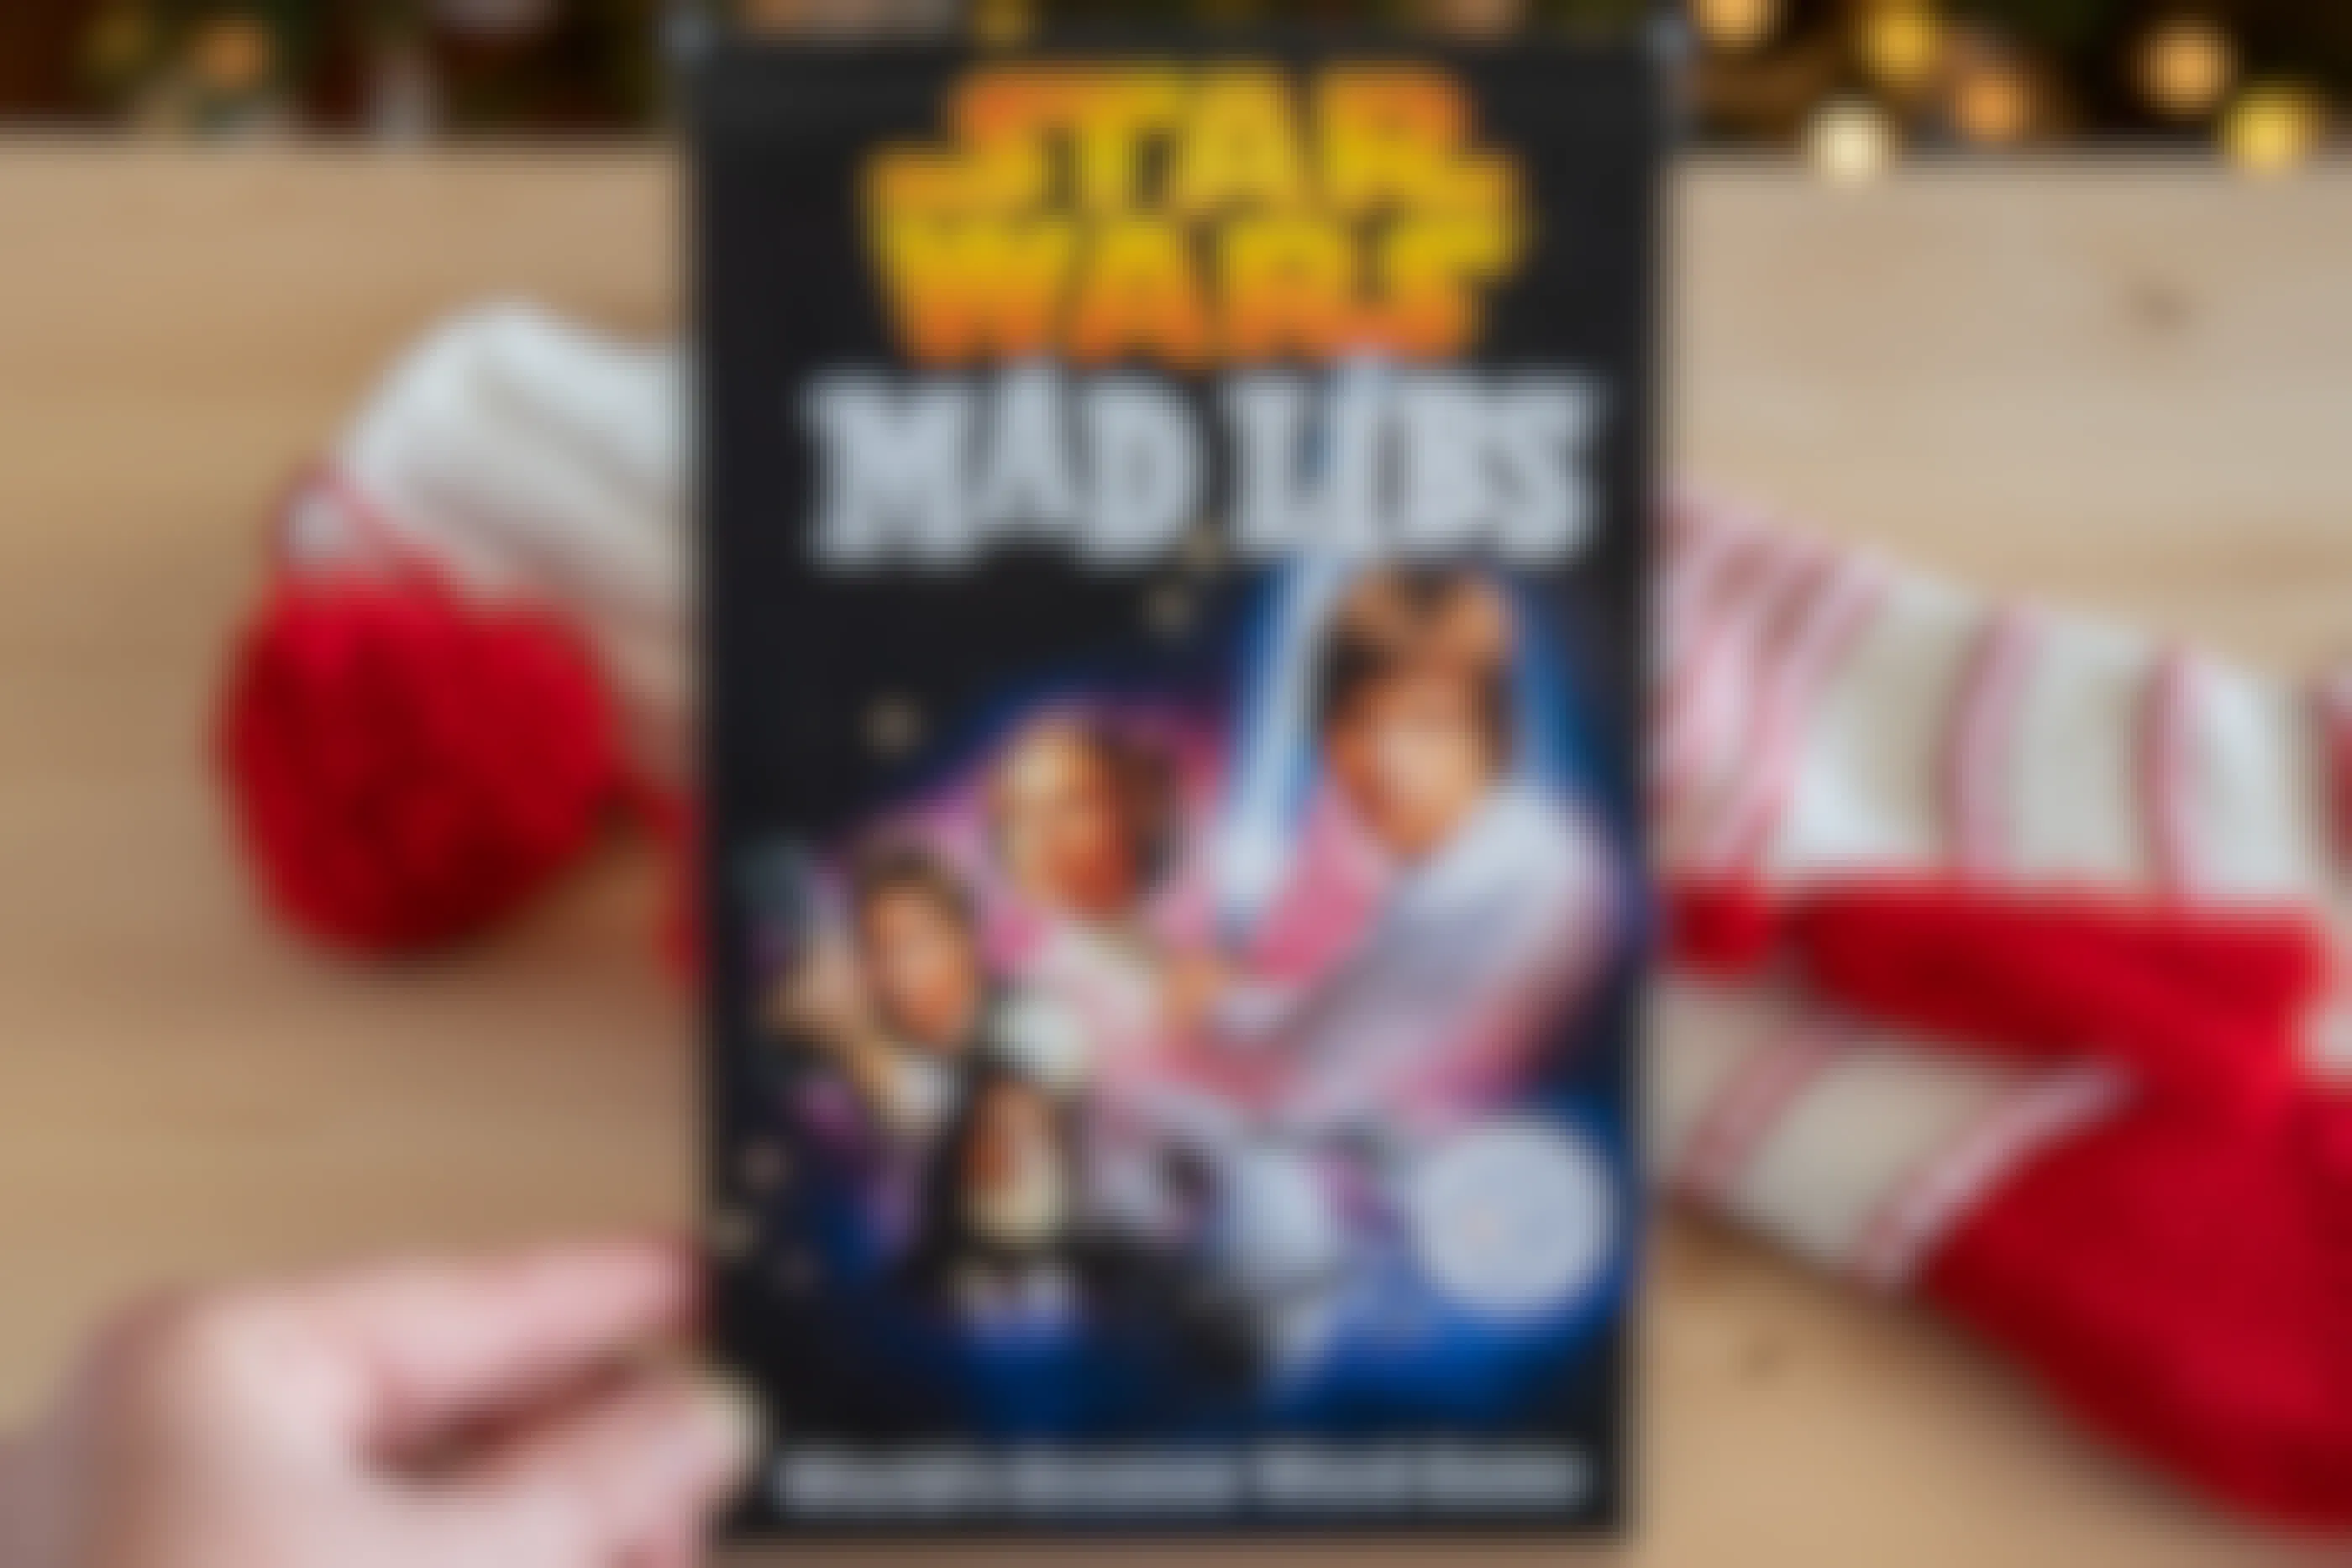 Star Wars Mad Libs book held in front of a Christmas stocking